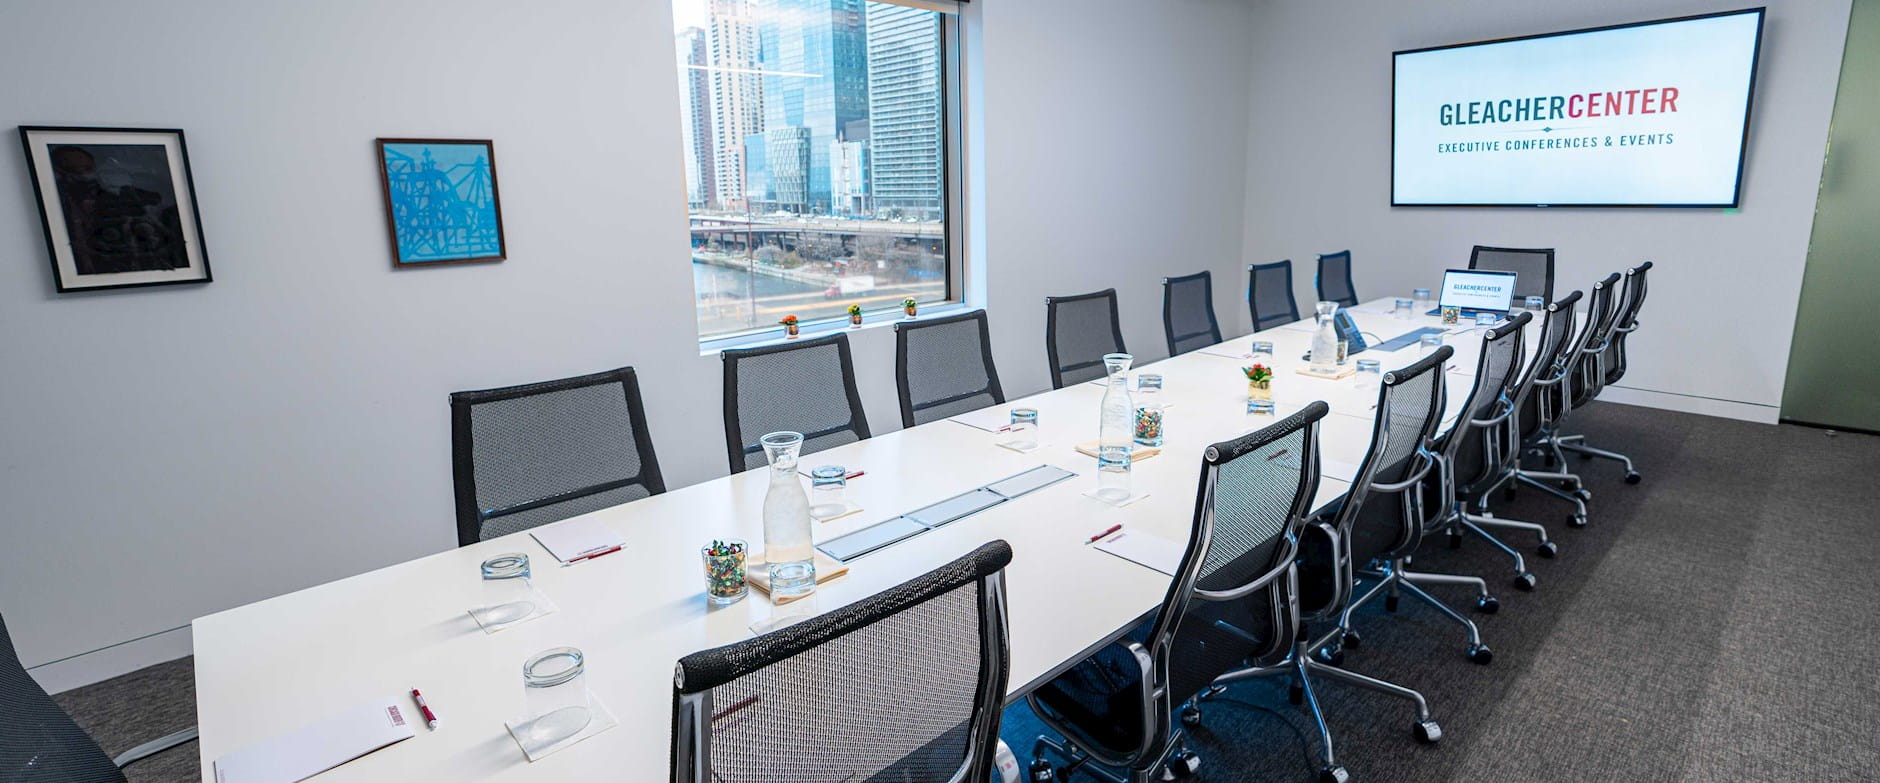 Long boardroom table in the Gleacher Center with a window overlooking the Chicago River